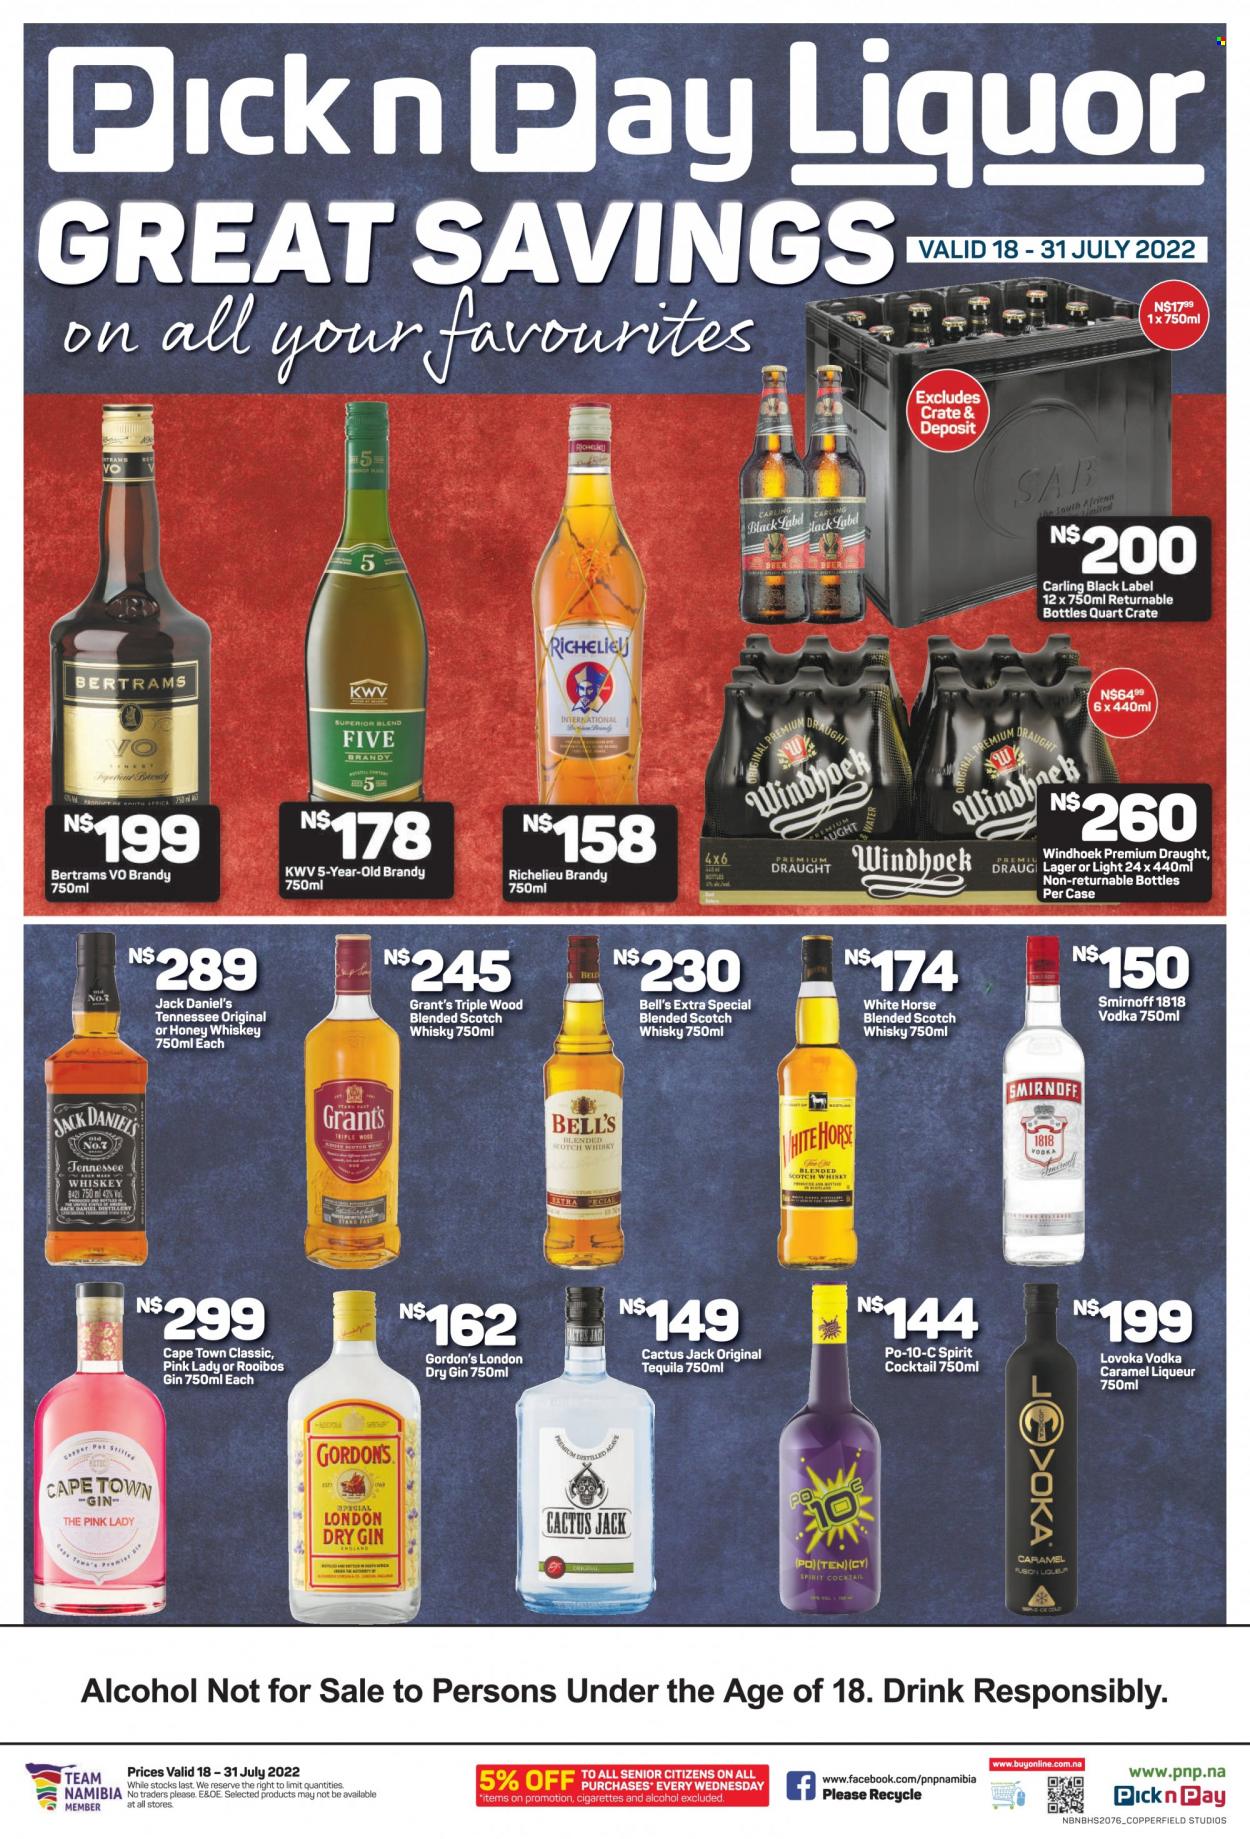 Pick n Pay catalogue  - 18/07/2022 - 31/07/2022 - Sales products - Pink Lady apples, Jack Daniel's, rooibos tea, alcohol, KWV, brandy, gin, liqueur, Smirnoff, tequila, vodka, whiskey, liquor, Gordon's, Grant's, Richelieu, scotch whisky, whisky, beer, Carling, Lager. Page 1.